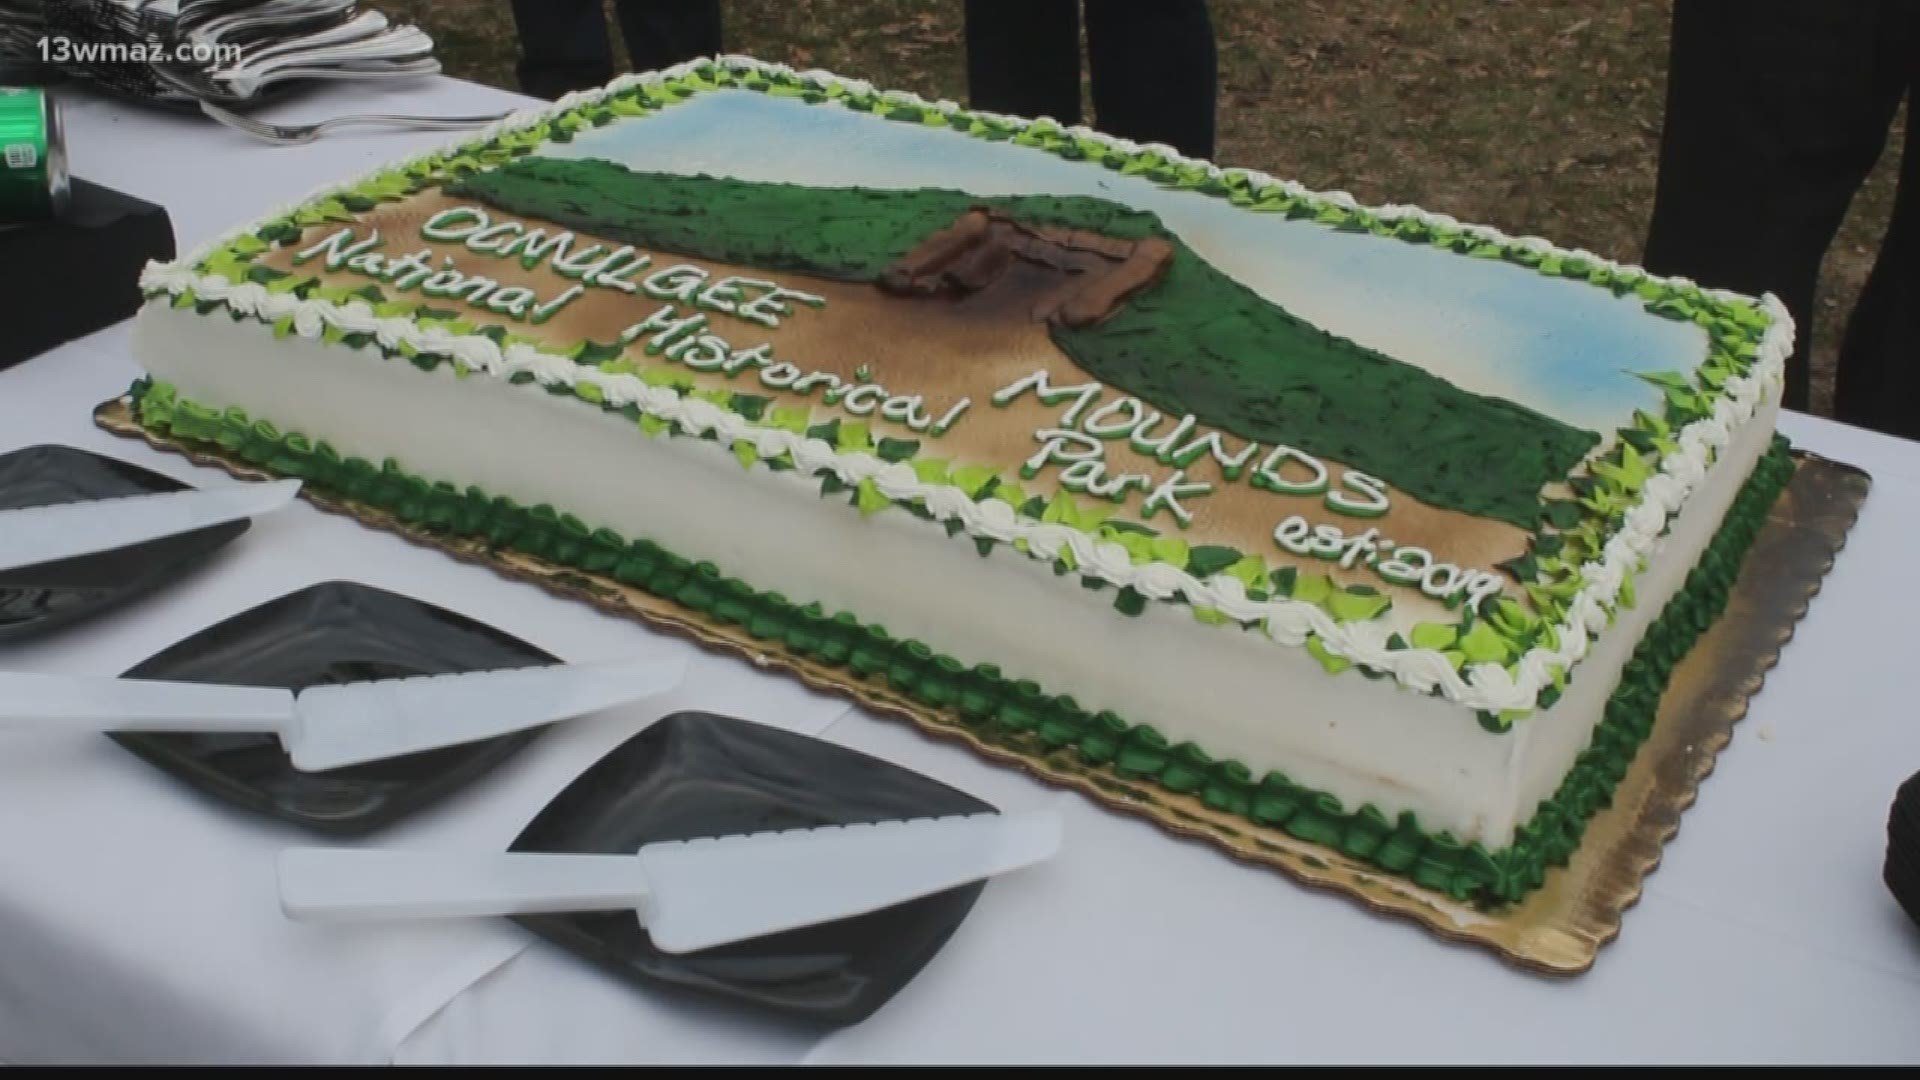 The newly-named Ocmulgee Mounds National Historic Park celebrated their new national park status Monday afternoon with a ribbon cutting.